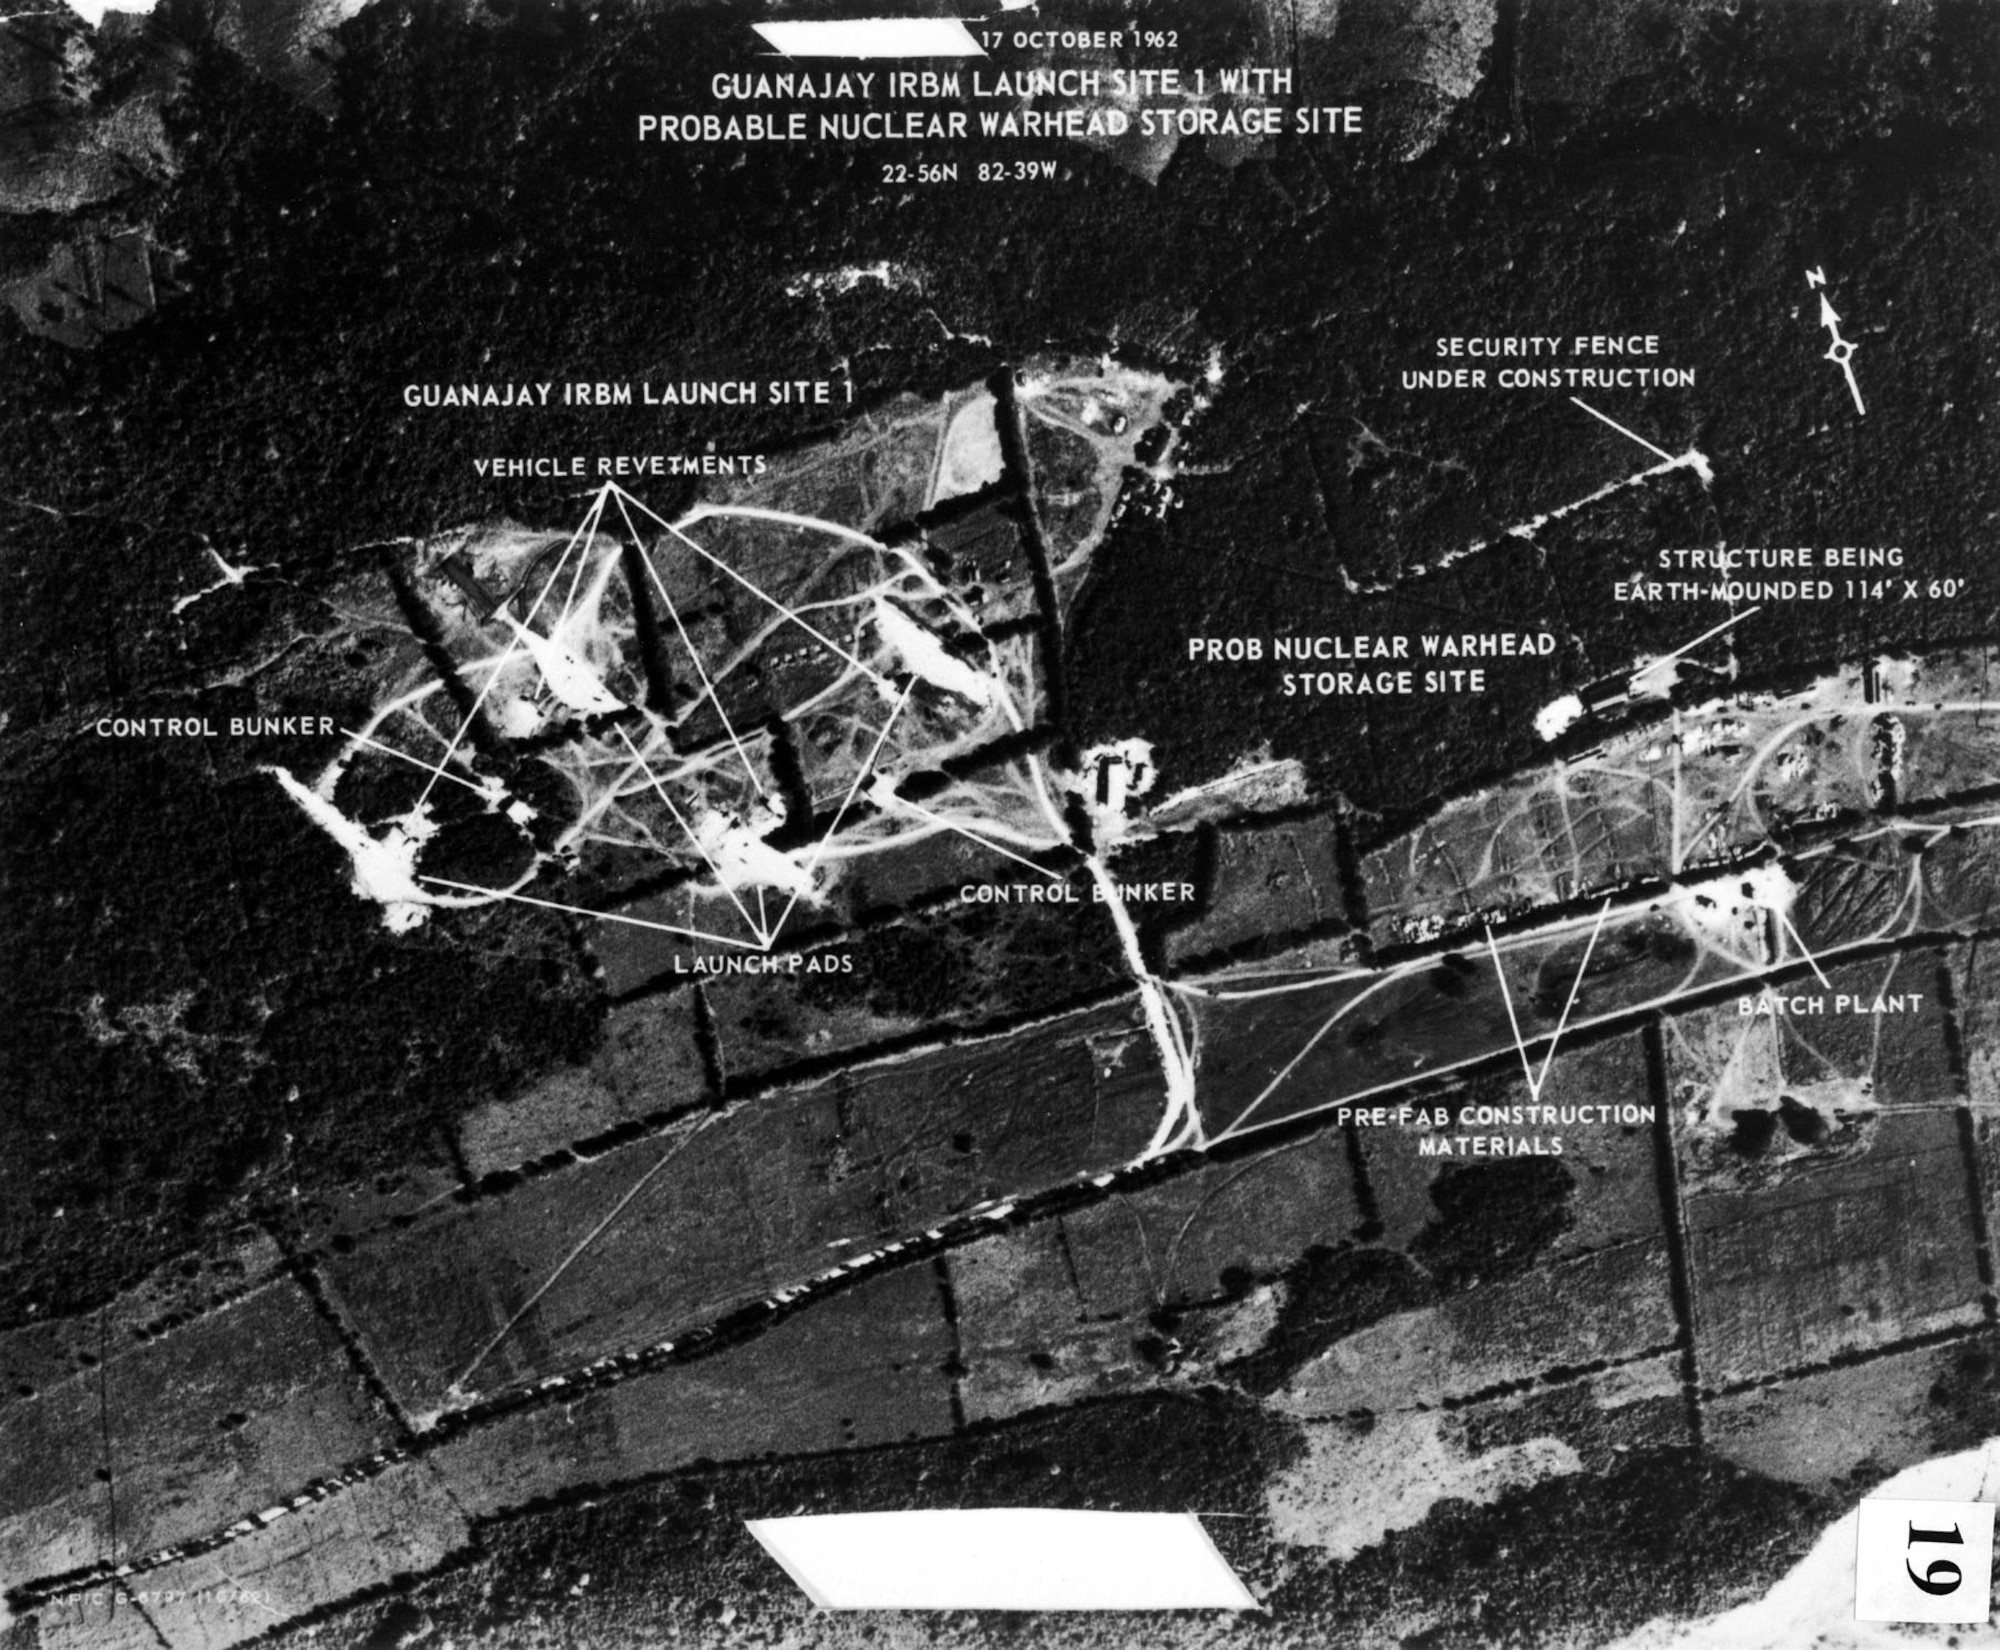 Missile installations at Guanajay, Cuba. This was the first image of an Intermediate Range Ballistic Missile (IRBM) site under construction in Cuba. Guanajay, in western Cuba near Havana, is about 270 miles from Miami, Fl, and only 130 miles from Key West, Fl. (U.S. Air Force photo)